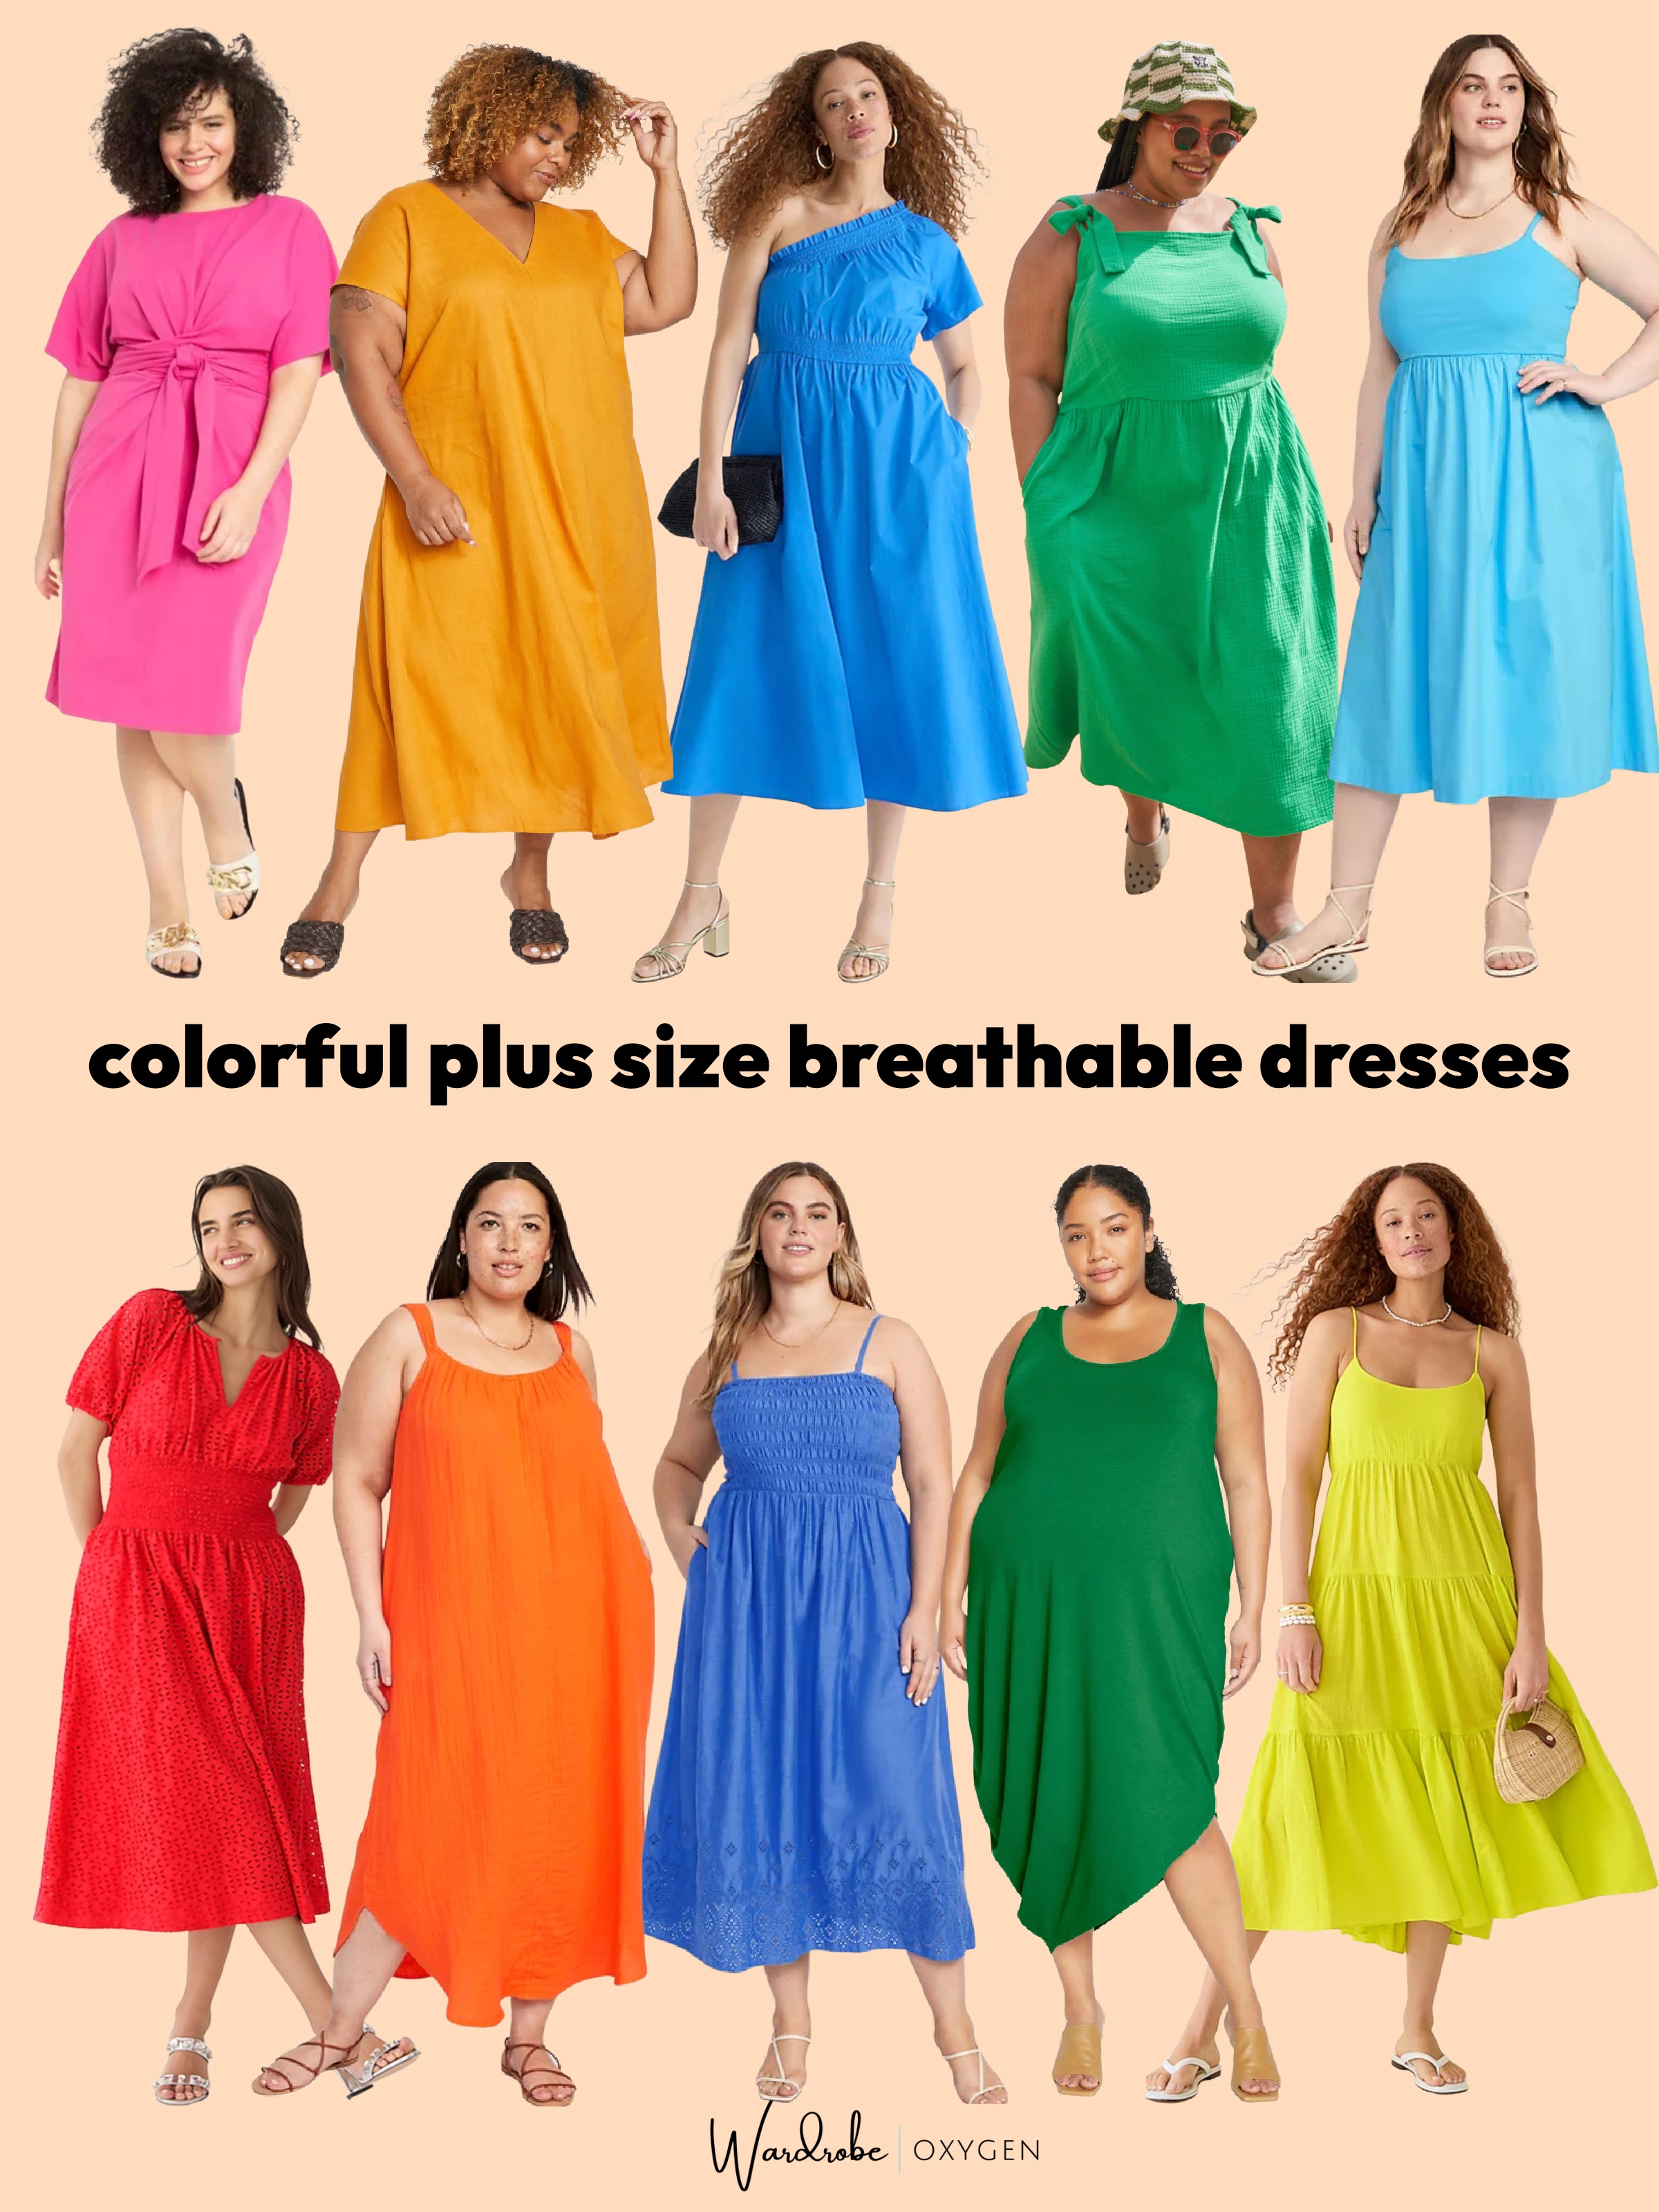 Colorful Plus Size Dresses for Summer